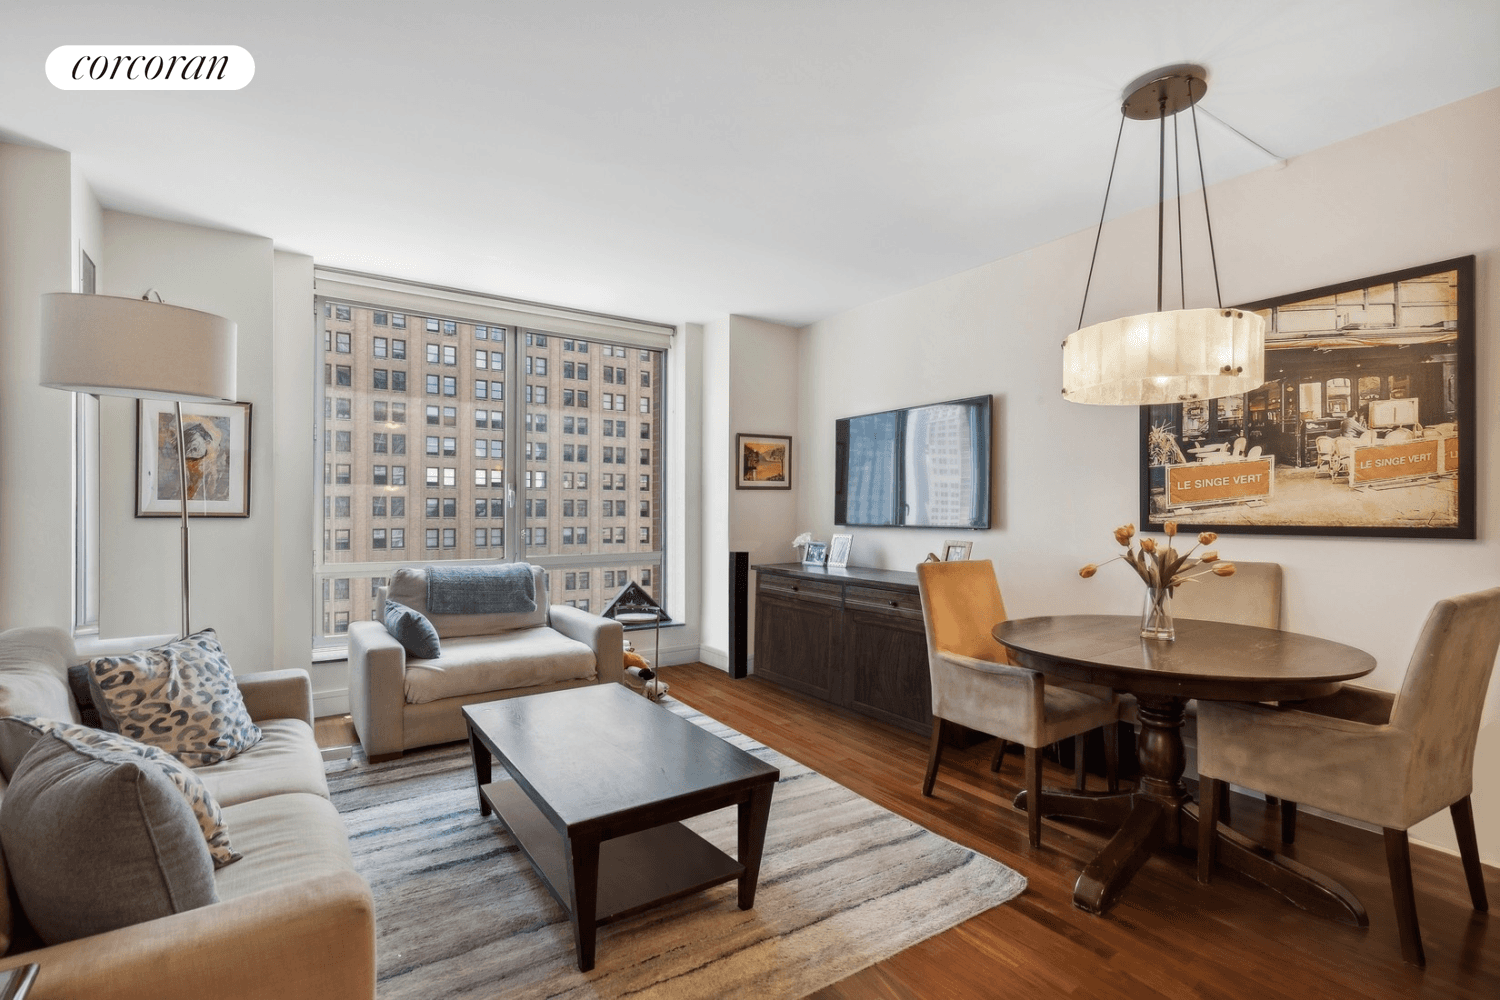 Great opportunity to purchase a light filled, 2 bed, 2 bath condominium with low monthlies in the luxury Millennium Tower Condominium.